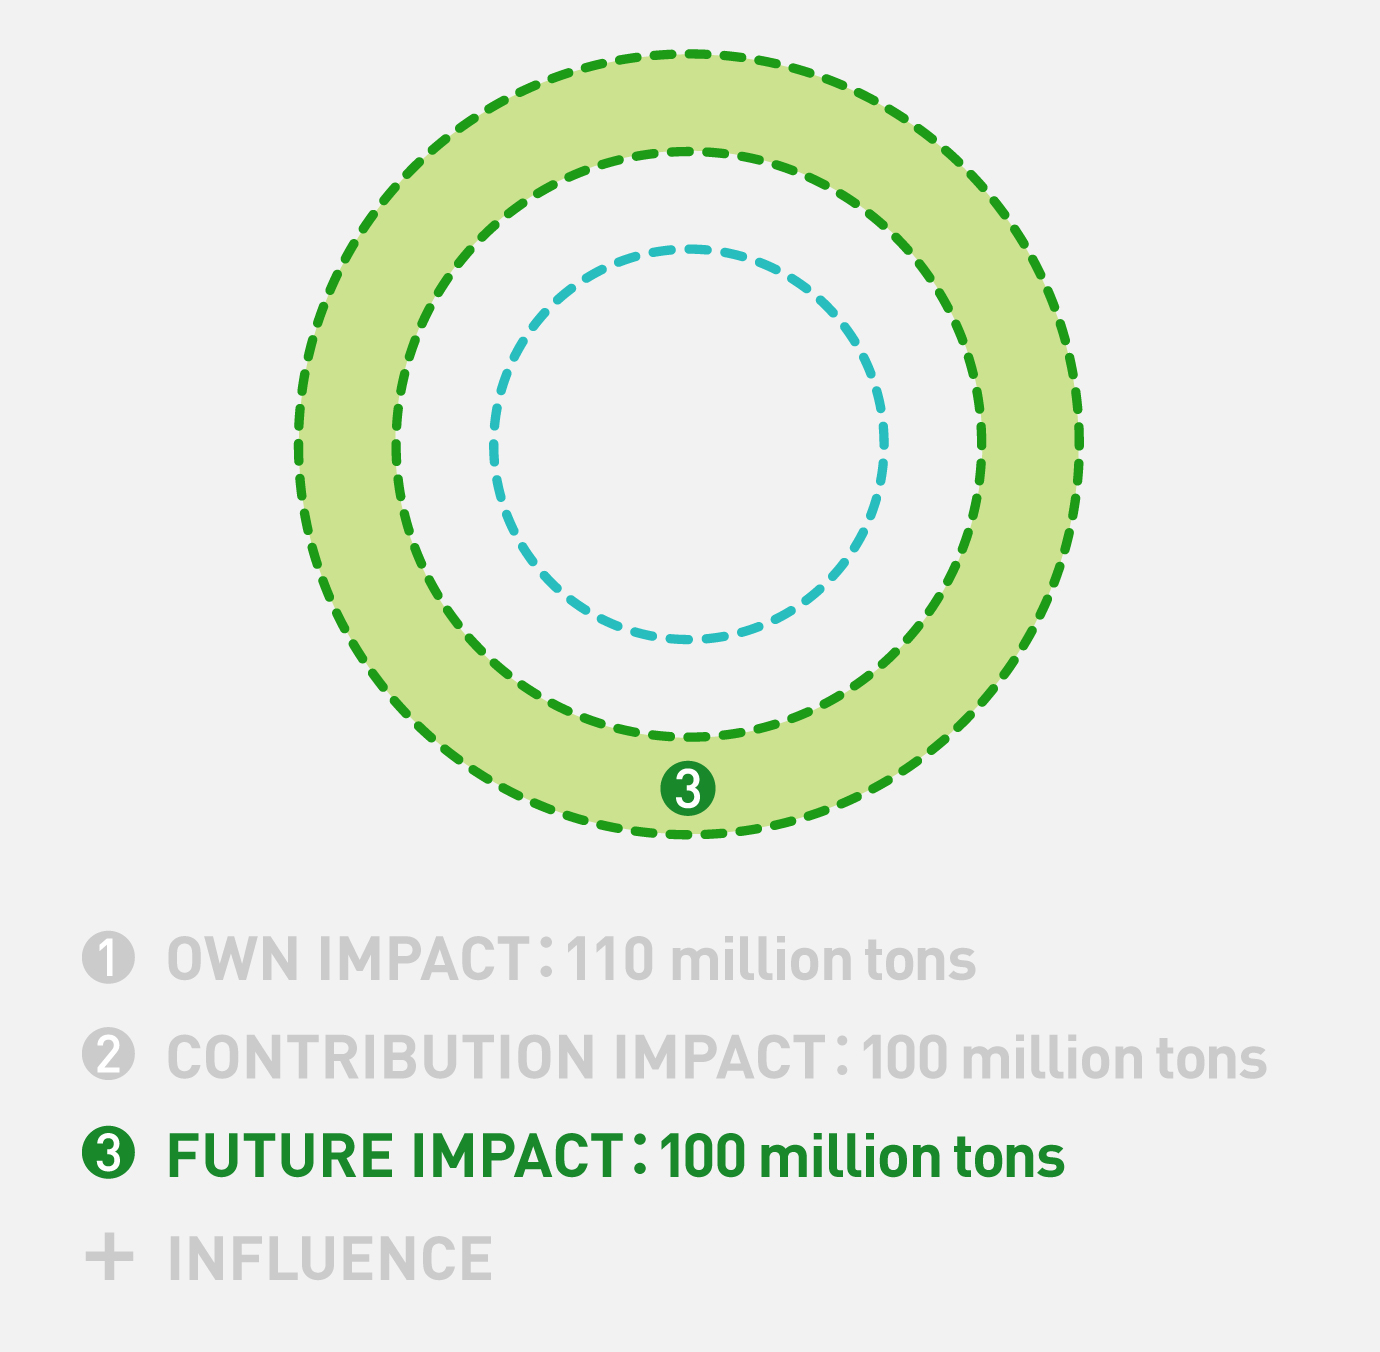 Conceptual diagram representing the area of our own value chain in carbon neutrality affected by Panasonic GREEN IMPACT. Among the three concentric circles, the third circle from the center is filled with color. With FUTURE IMPACT, we aim to contribute to a CO2 emissions reduction of 100 million tons or more by creating new business fields and new technologies.